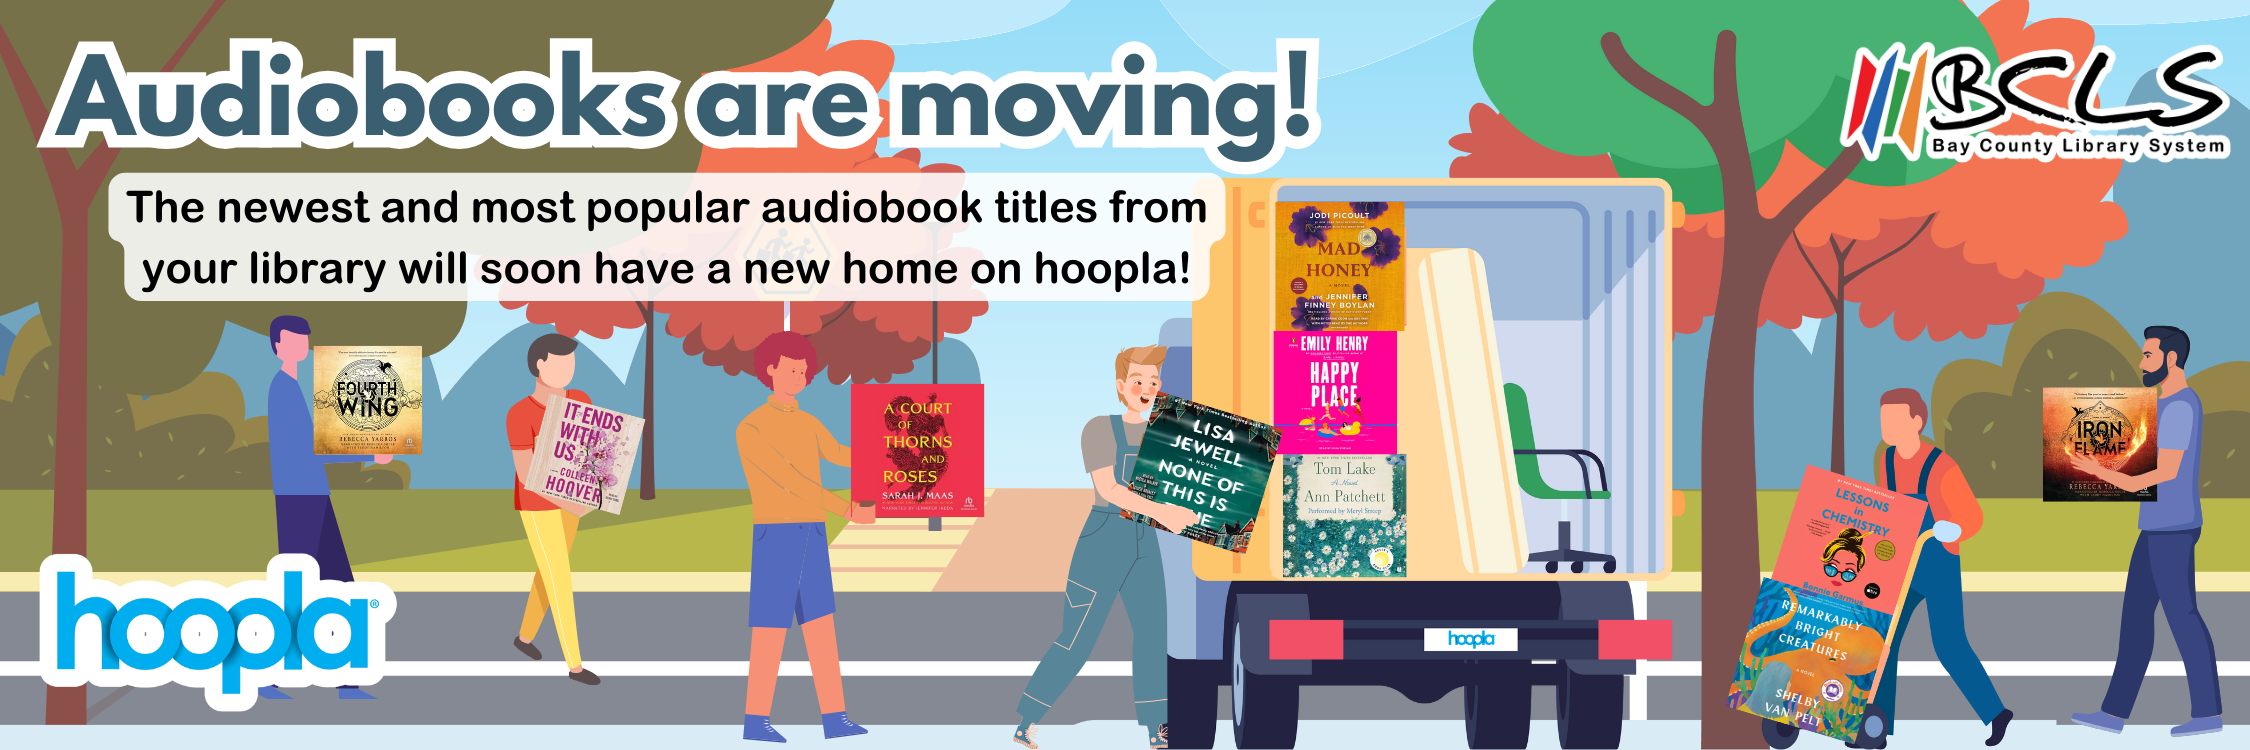 audiobooks are moving to hoopla at BCLS